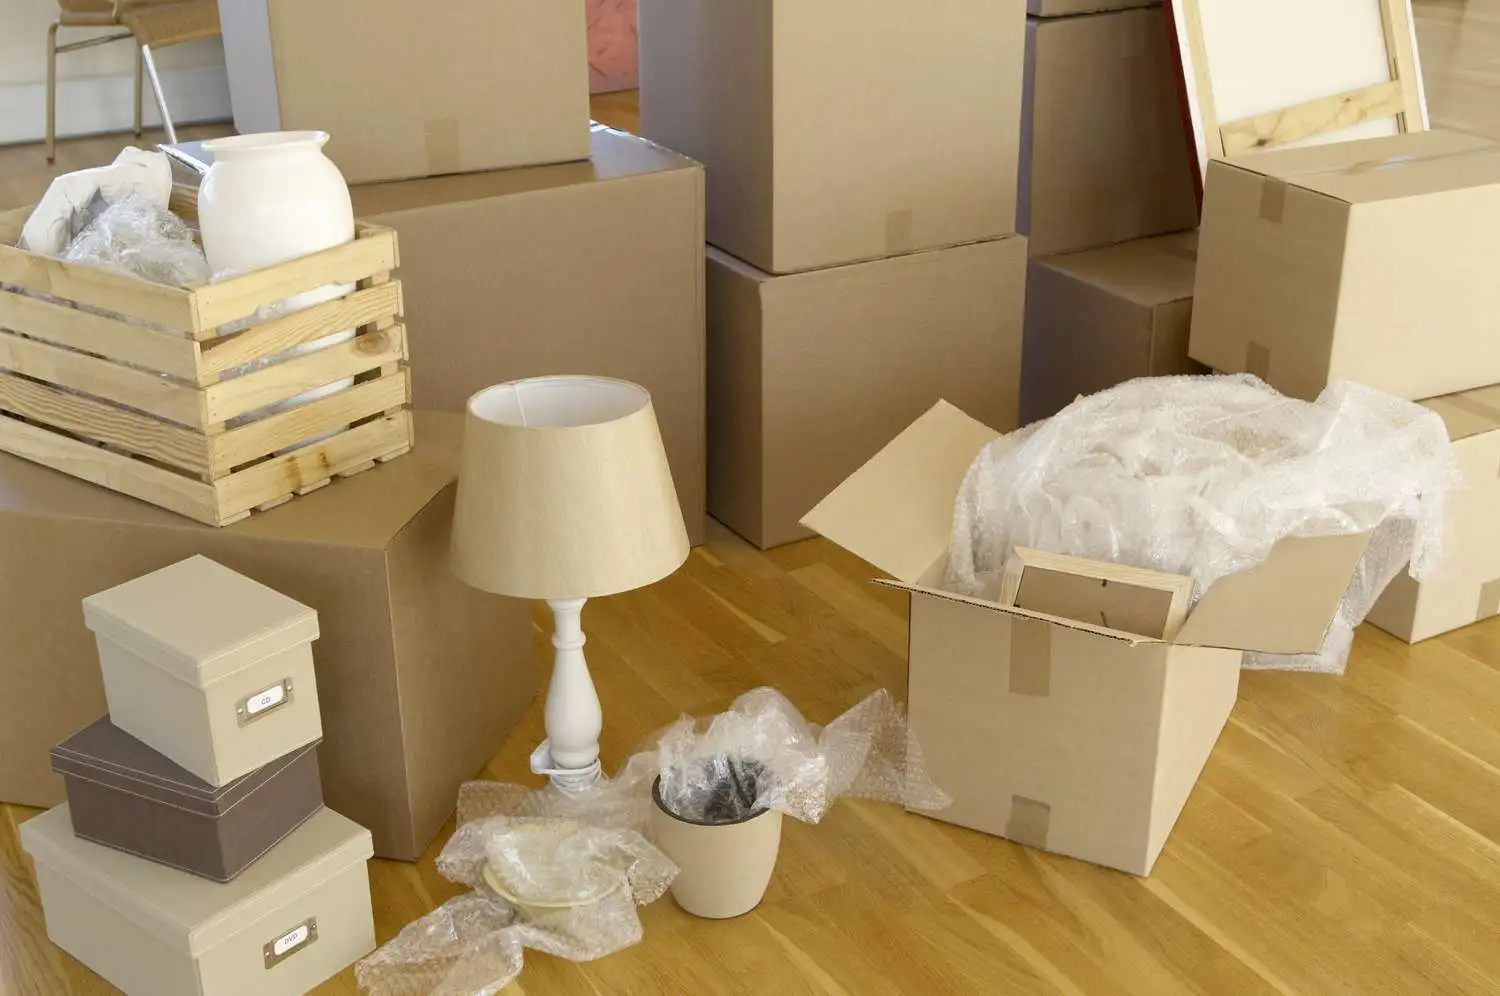 Tips for Safely Packing and Transporting Lamps and Light Fixtures During a Move